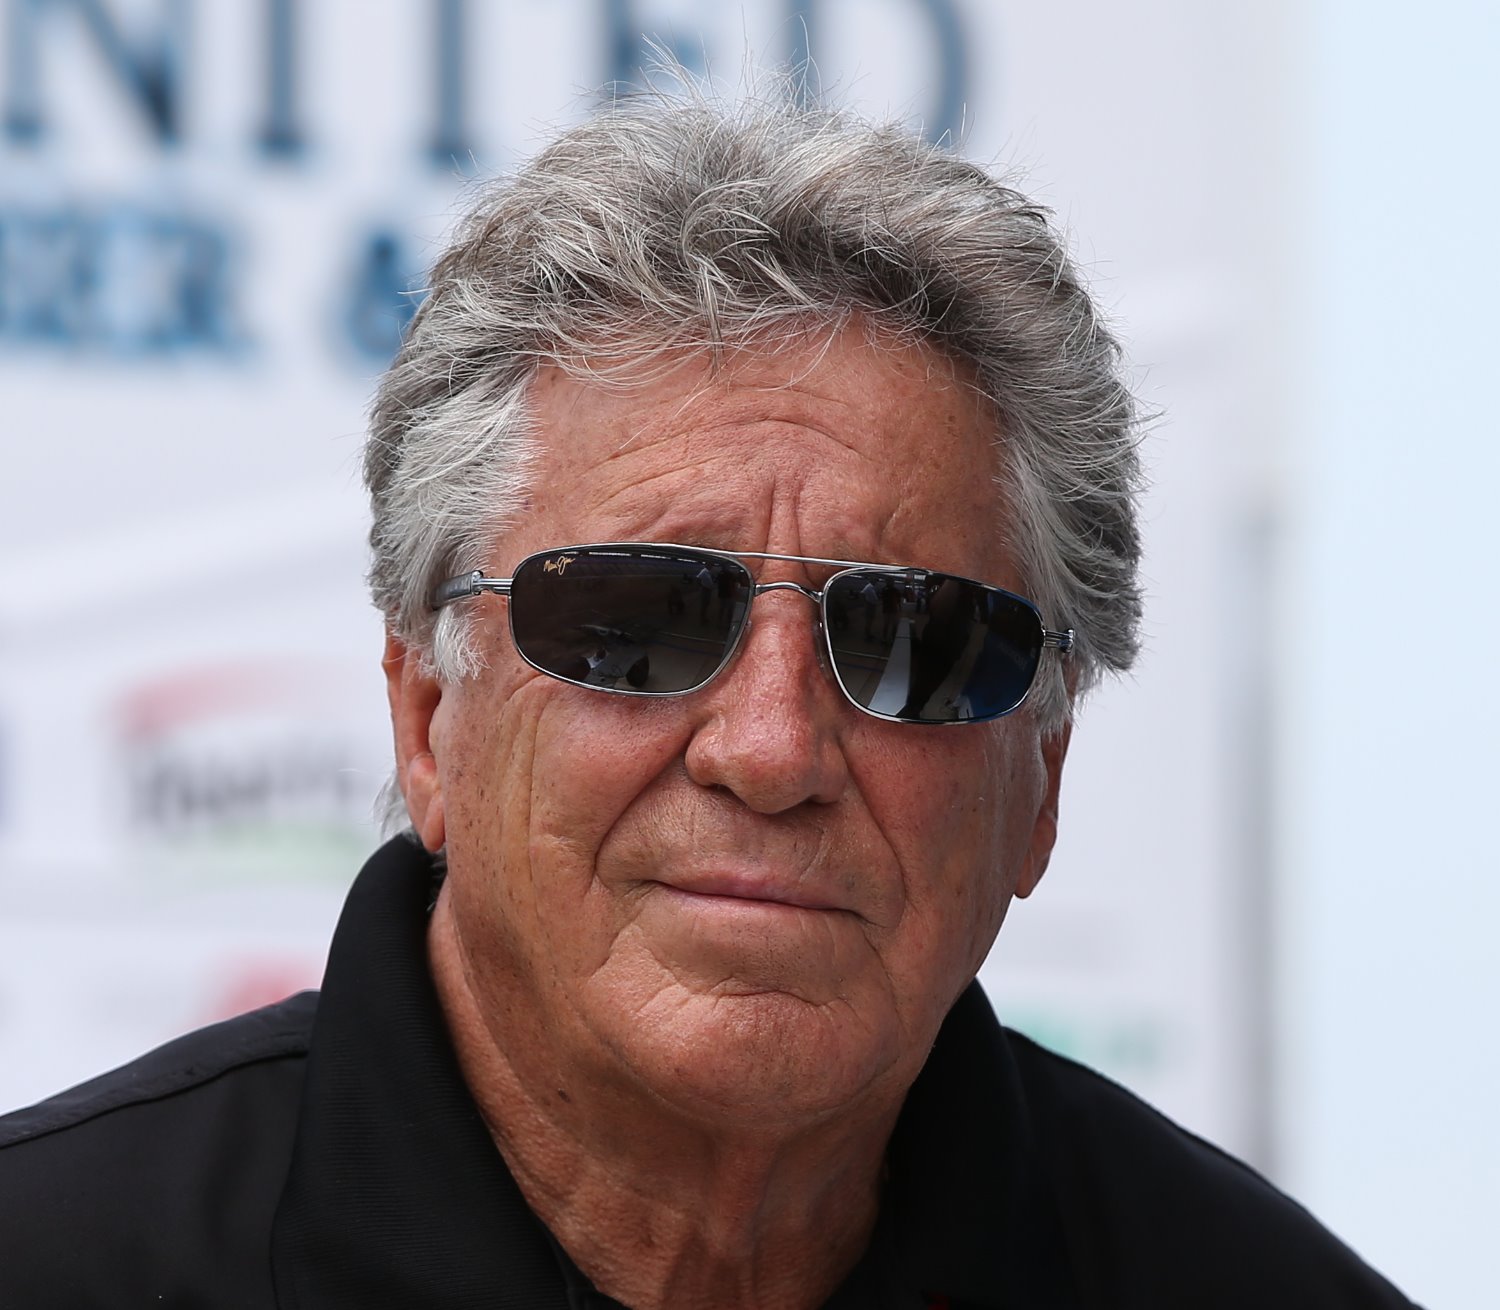 AR1 caught up with Mario Andretti recently at Mid-Ohio. The racing legend pointed out the unsuitability of the halo for banked oval tracks 